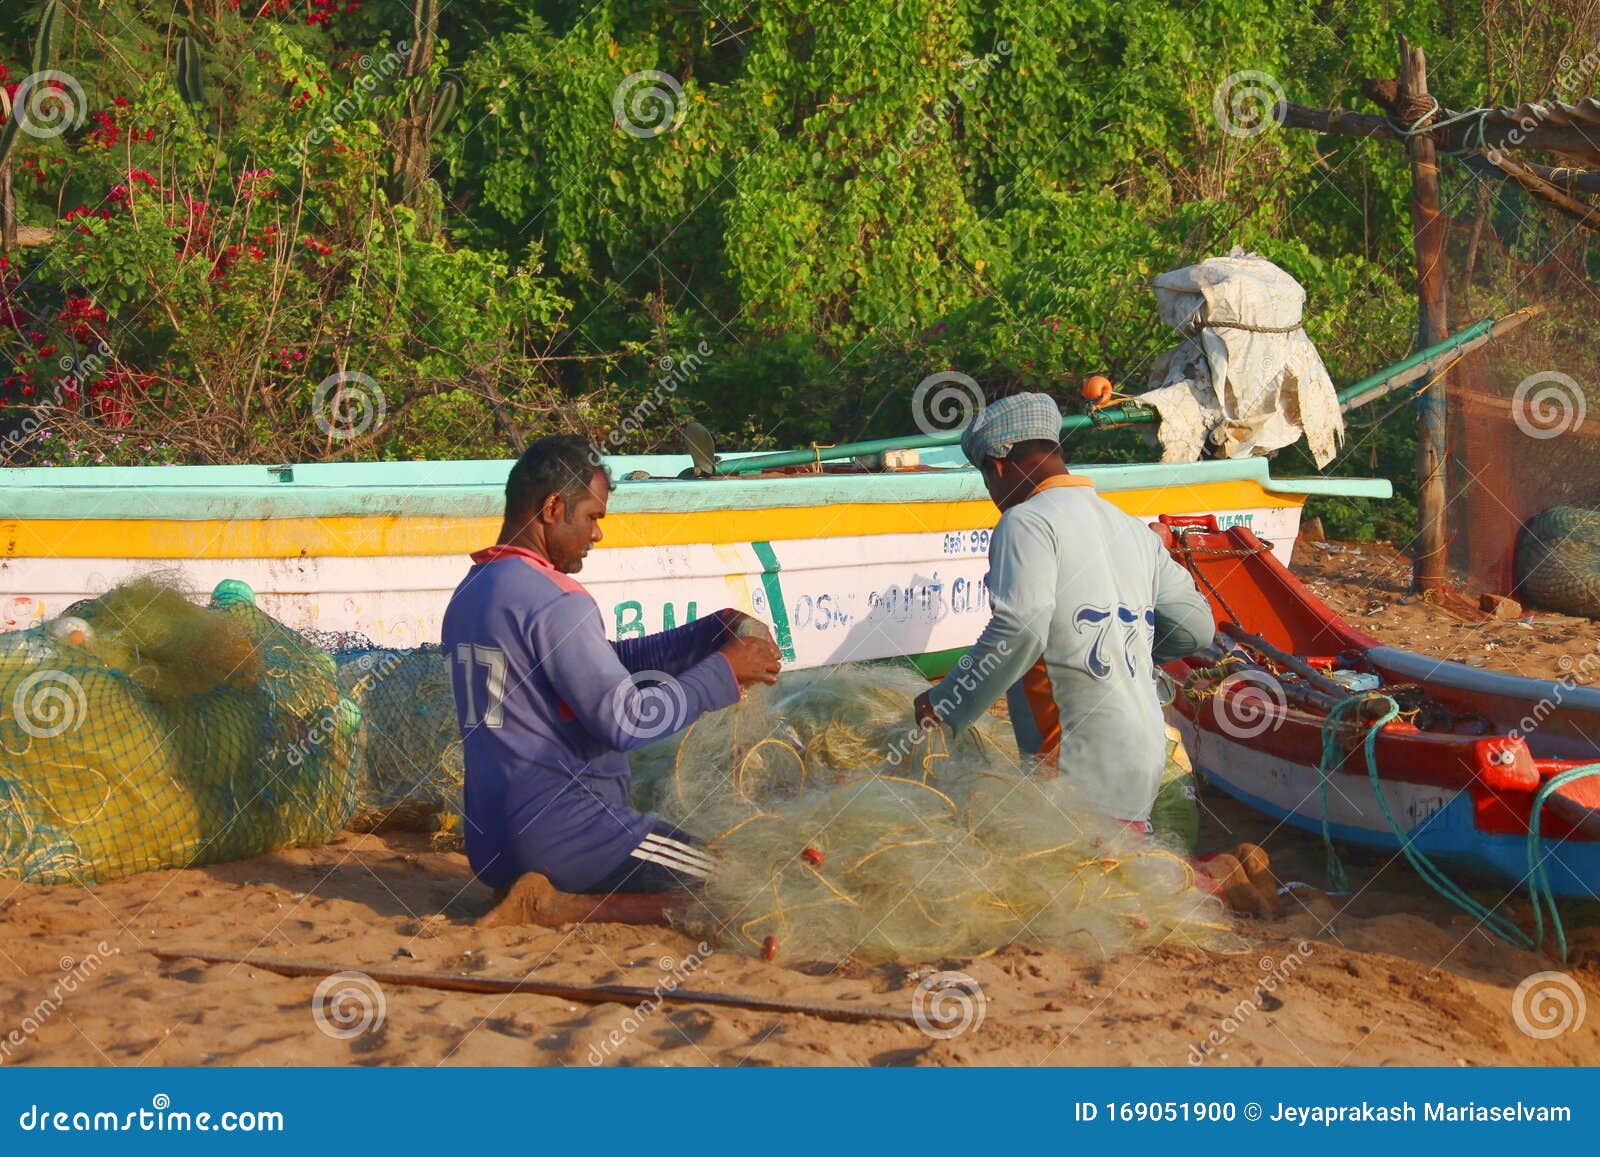 Fishermen Taking Out Fish from Their Gill Net in Tamil Nadu, India